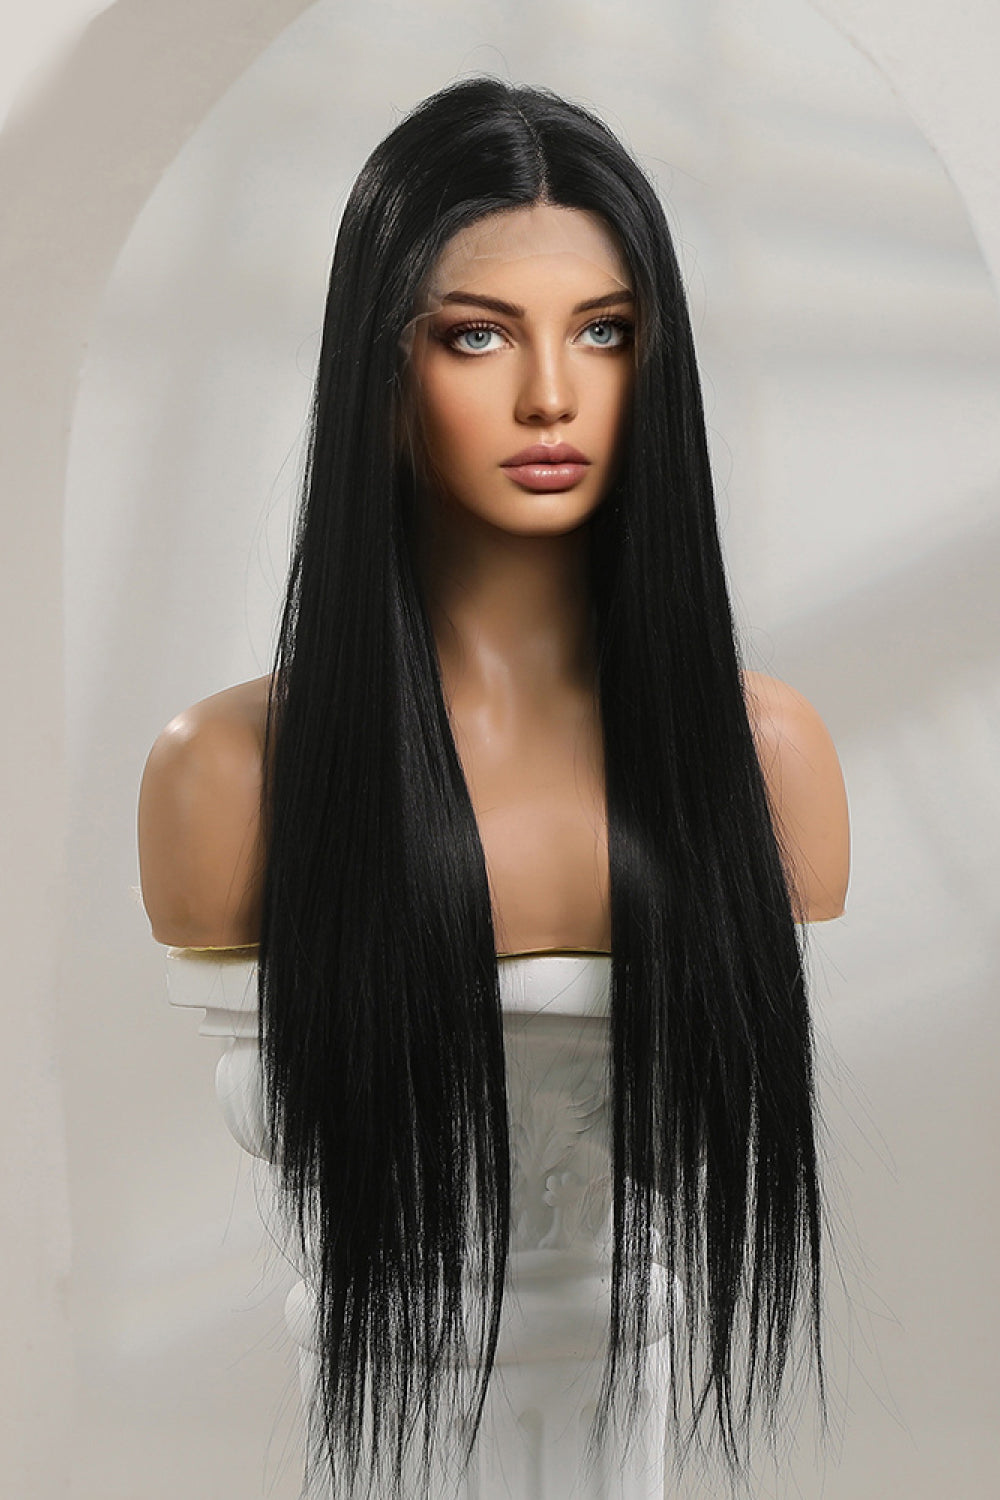 13*2" Long Lace Front Straight Synthetic Wigs 26" Long 150% Density COCO CRESS